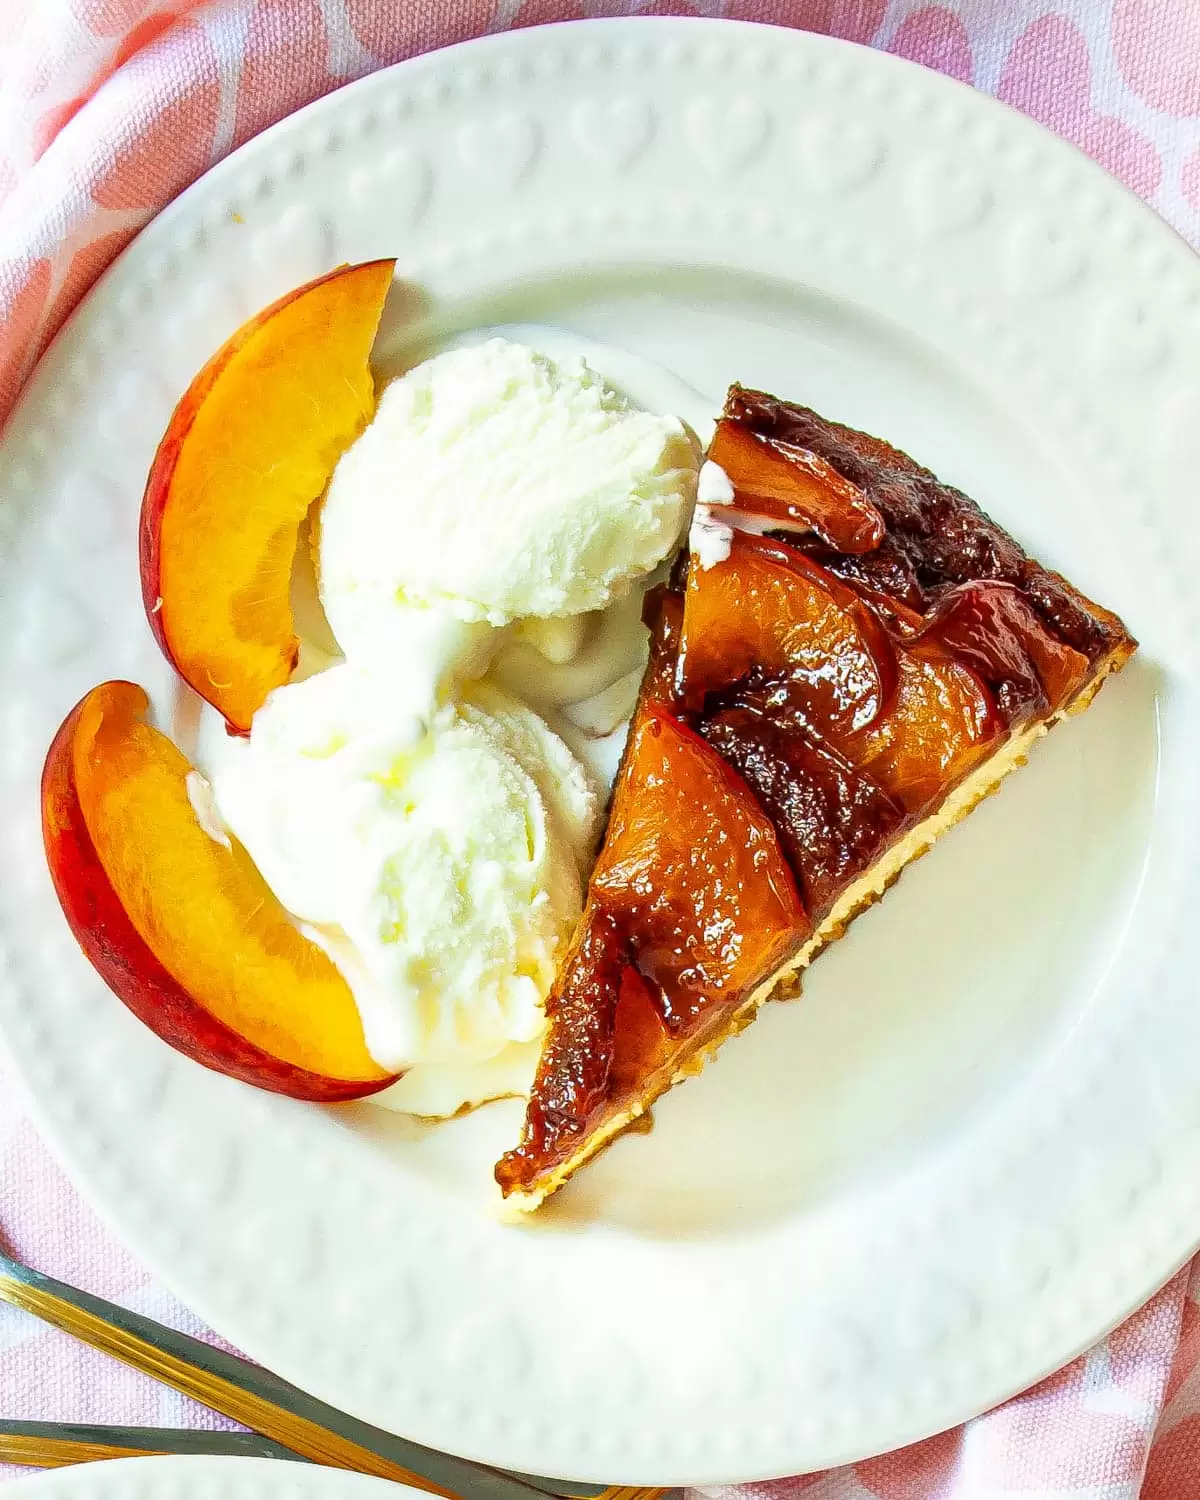 a slice of Peach Upside Down Cake with 2 scoops of ice cream on a white plate